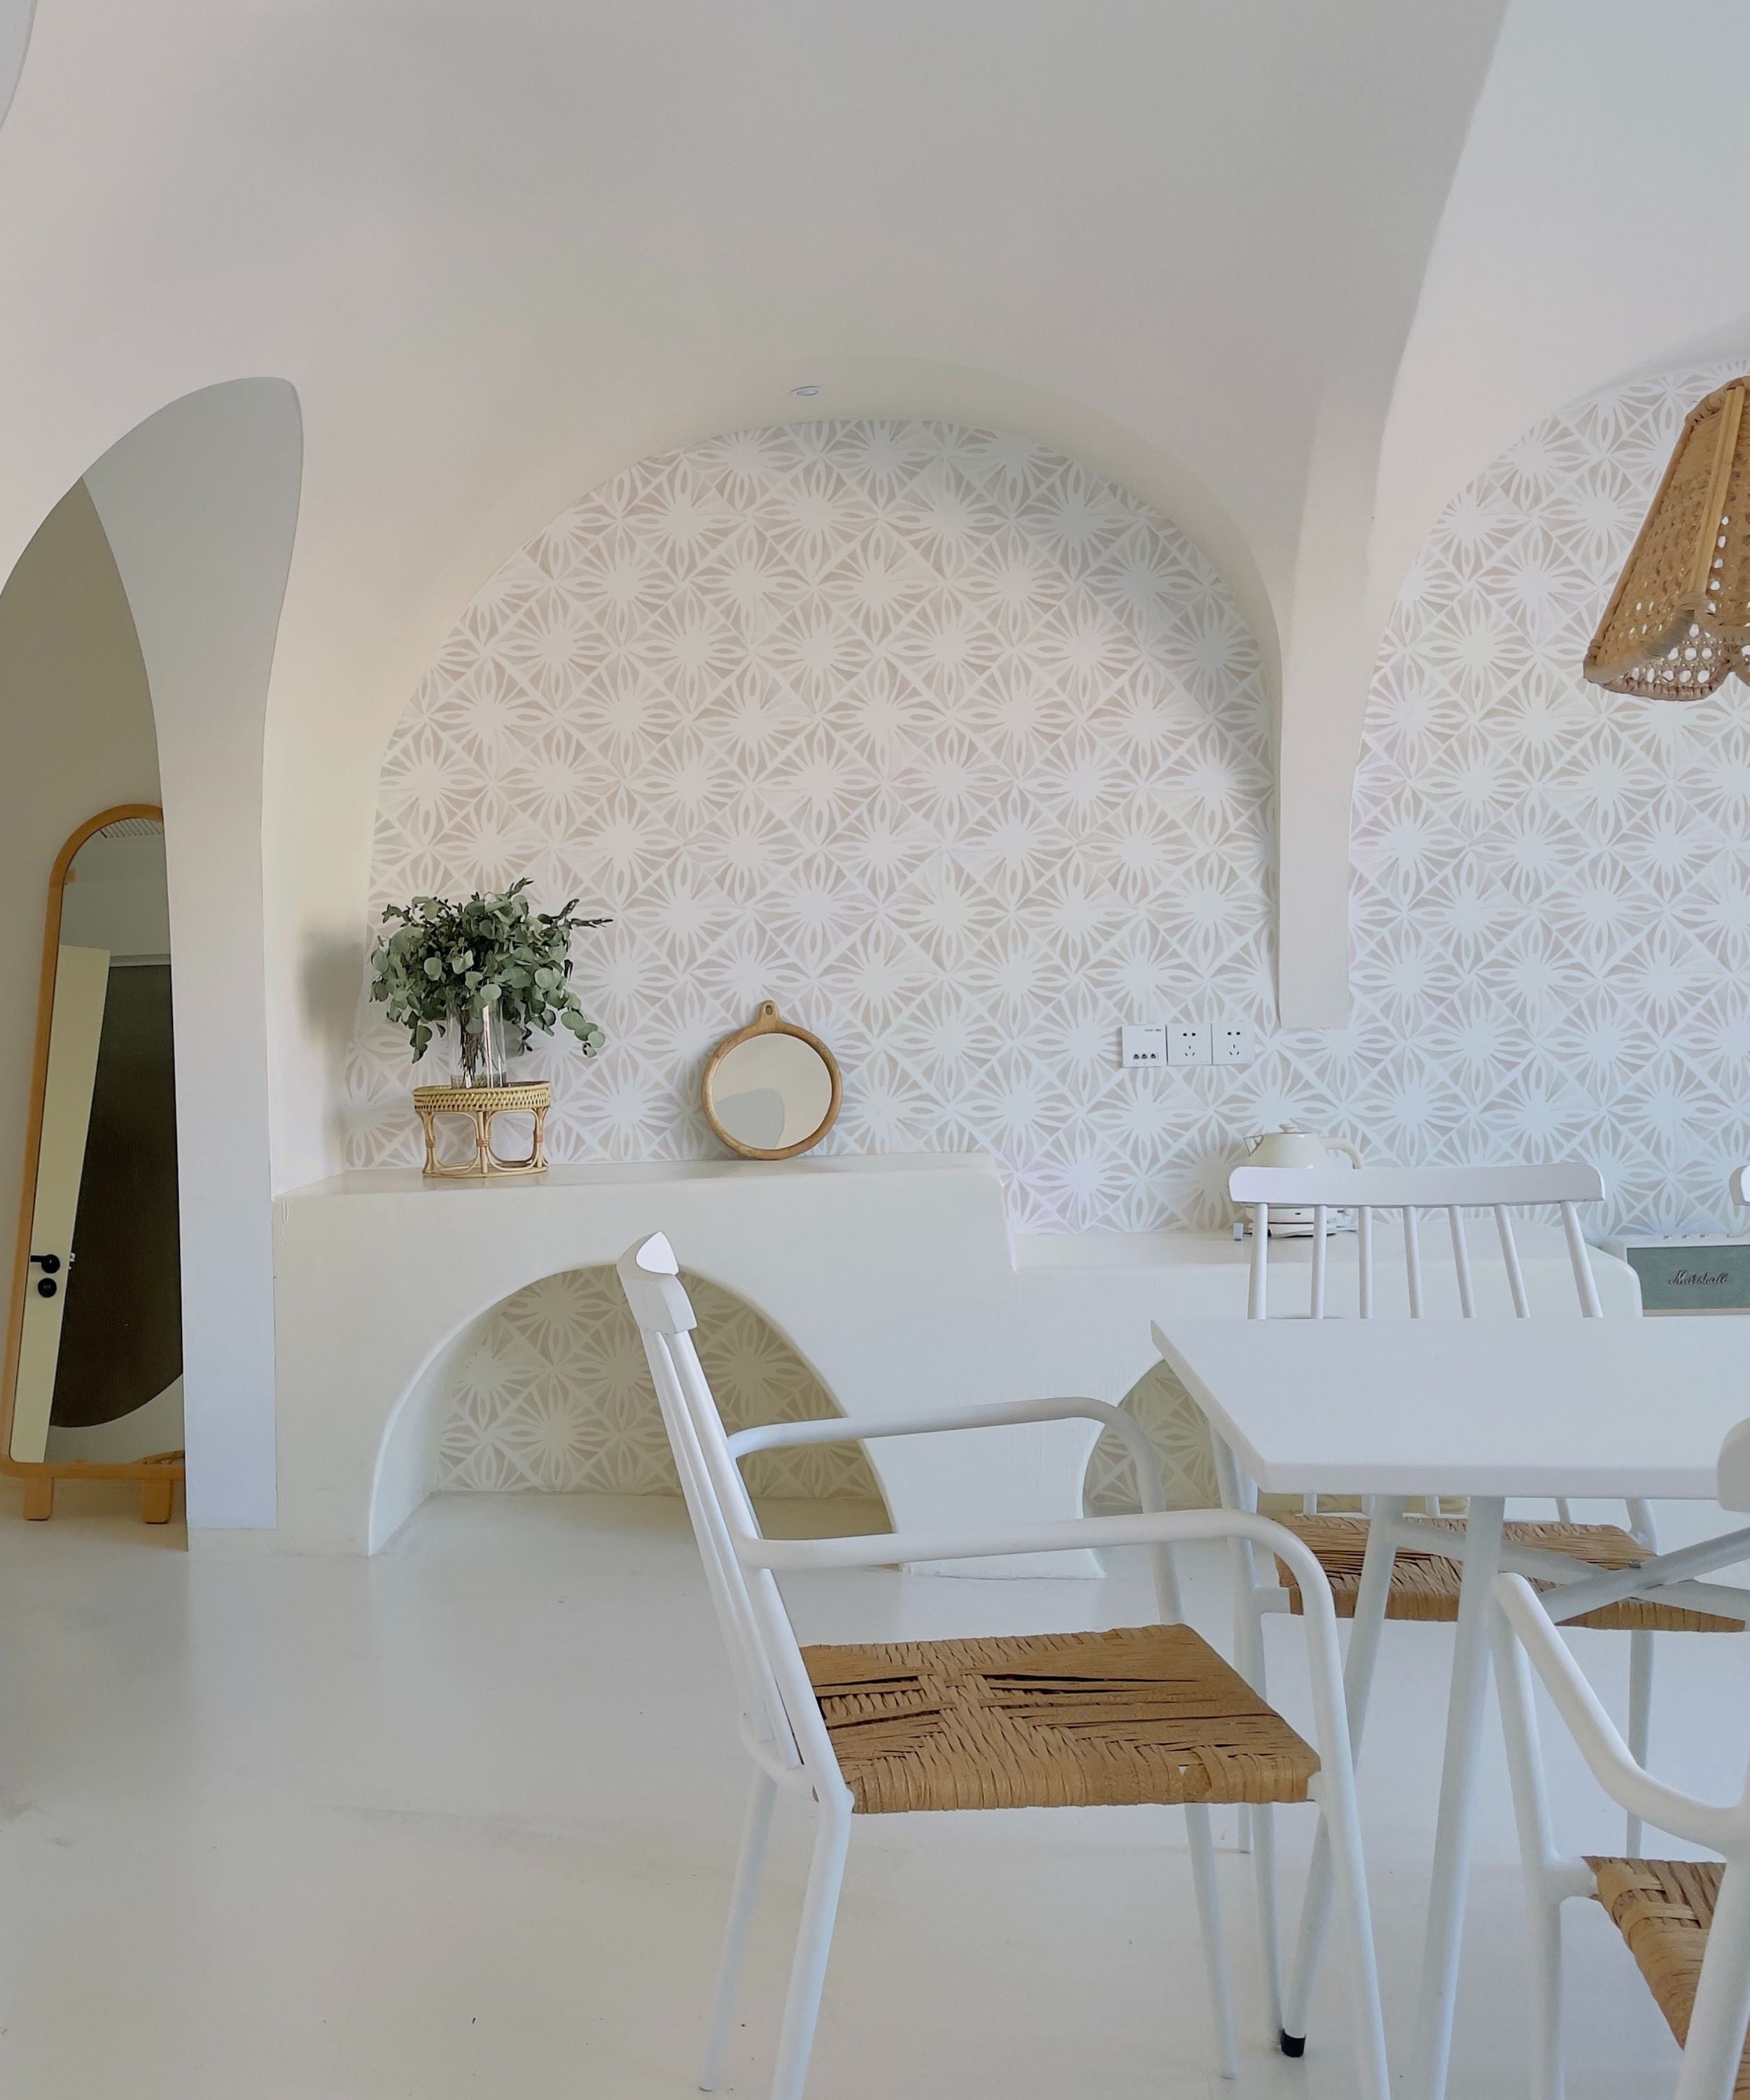 A bright and airy dining nook accented by Moroccan Tile Wallpaper II - Linen, featuring a subtle linen-colored geometric design, paired with modern white chairs and a natural wooden table, all under the charm of a unique arched alcove.